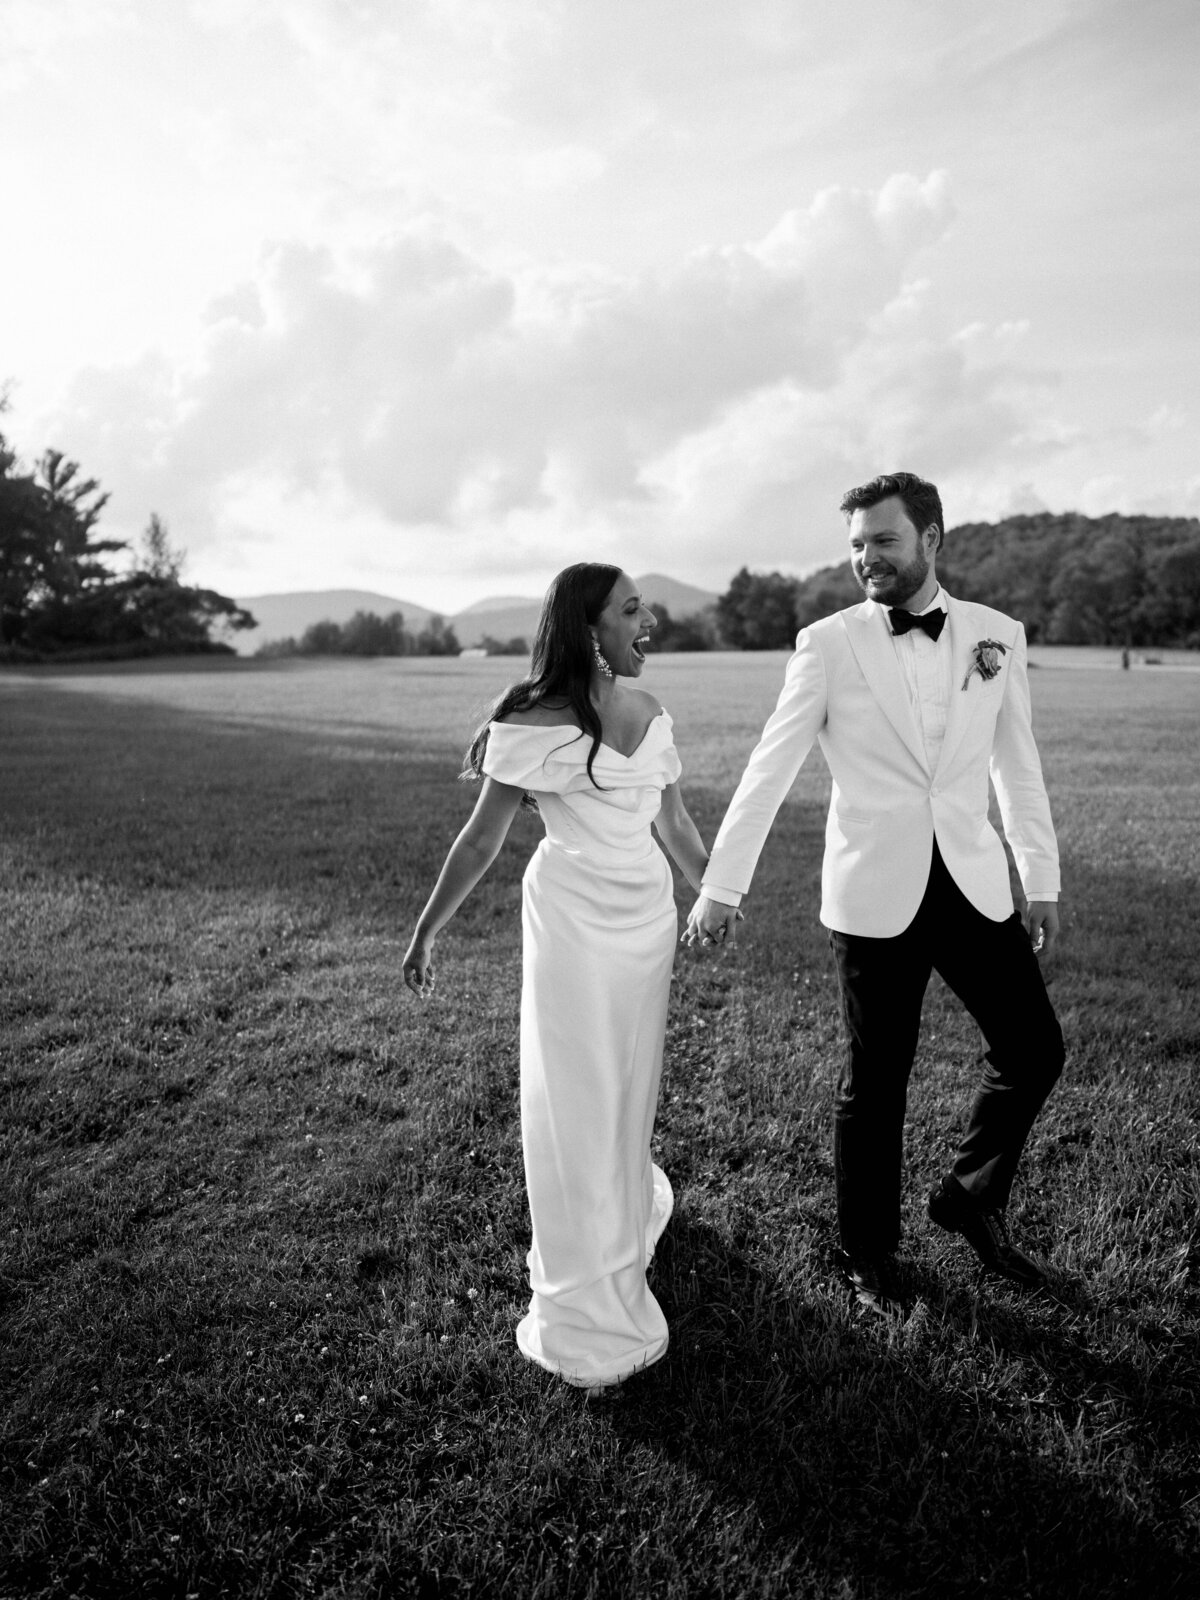 Liz Andolina Photography Destination Wedding Photographer in Italy, New York, Across the East Coast Editorial, heritage-quality images for stylish couples-775